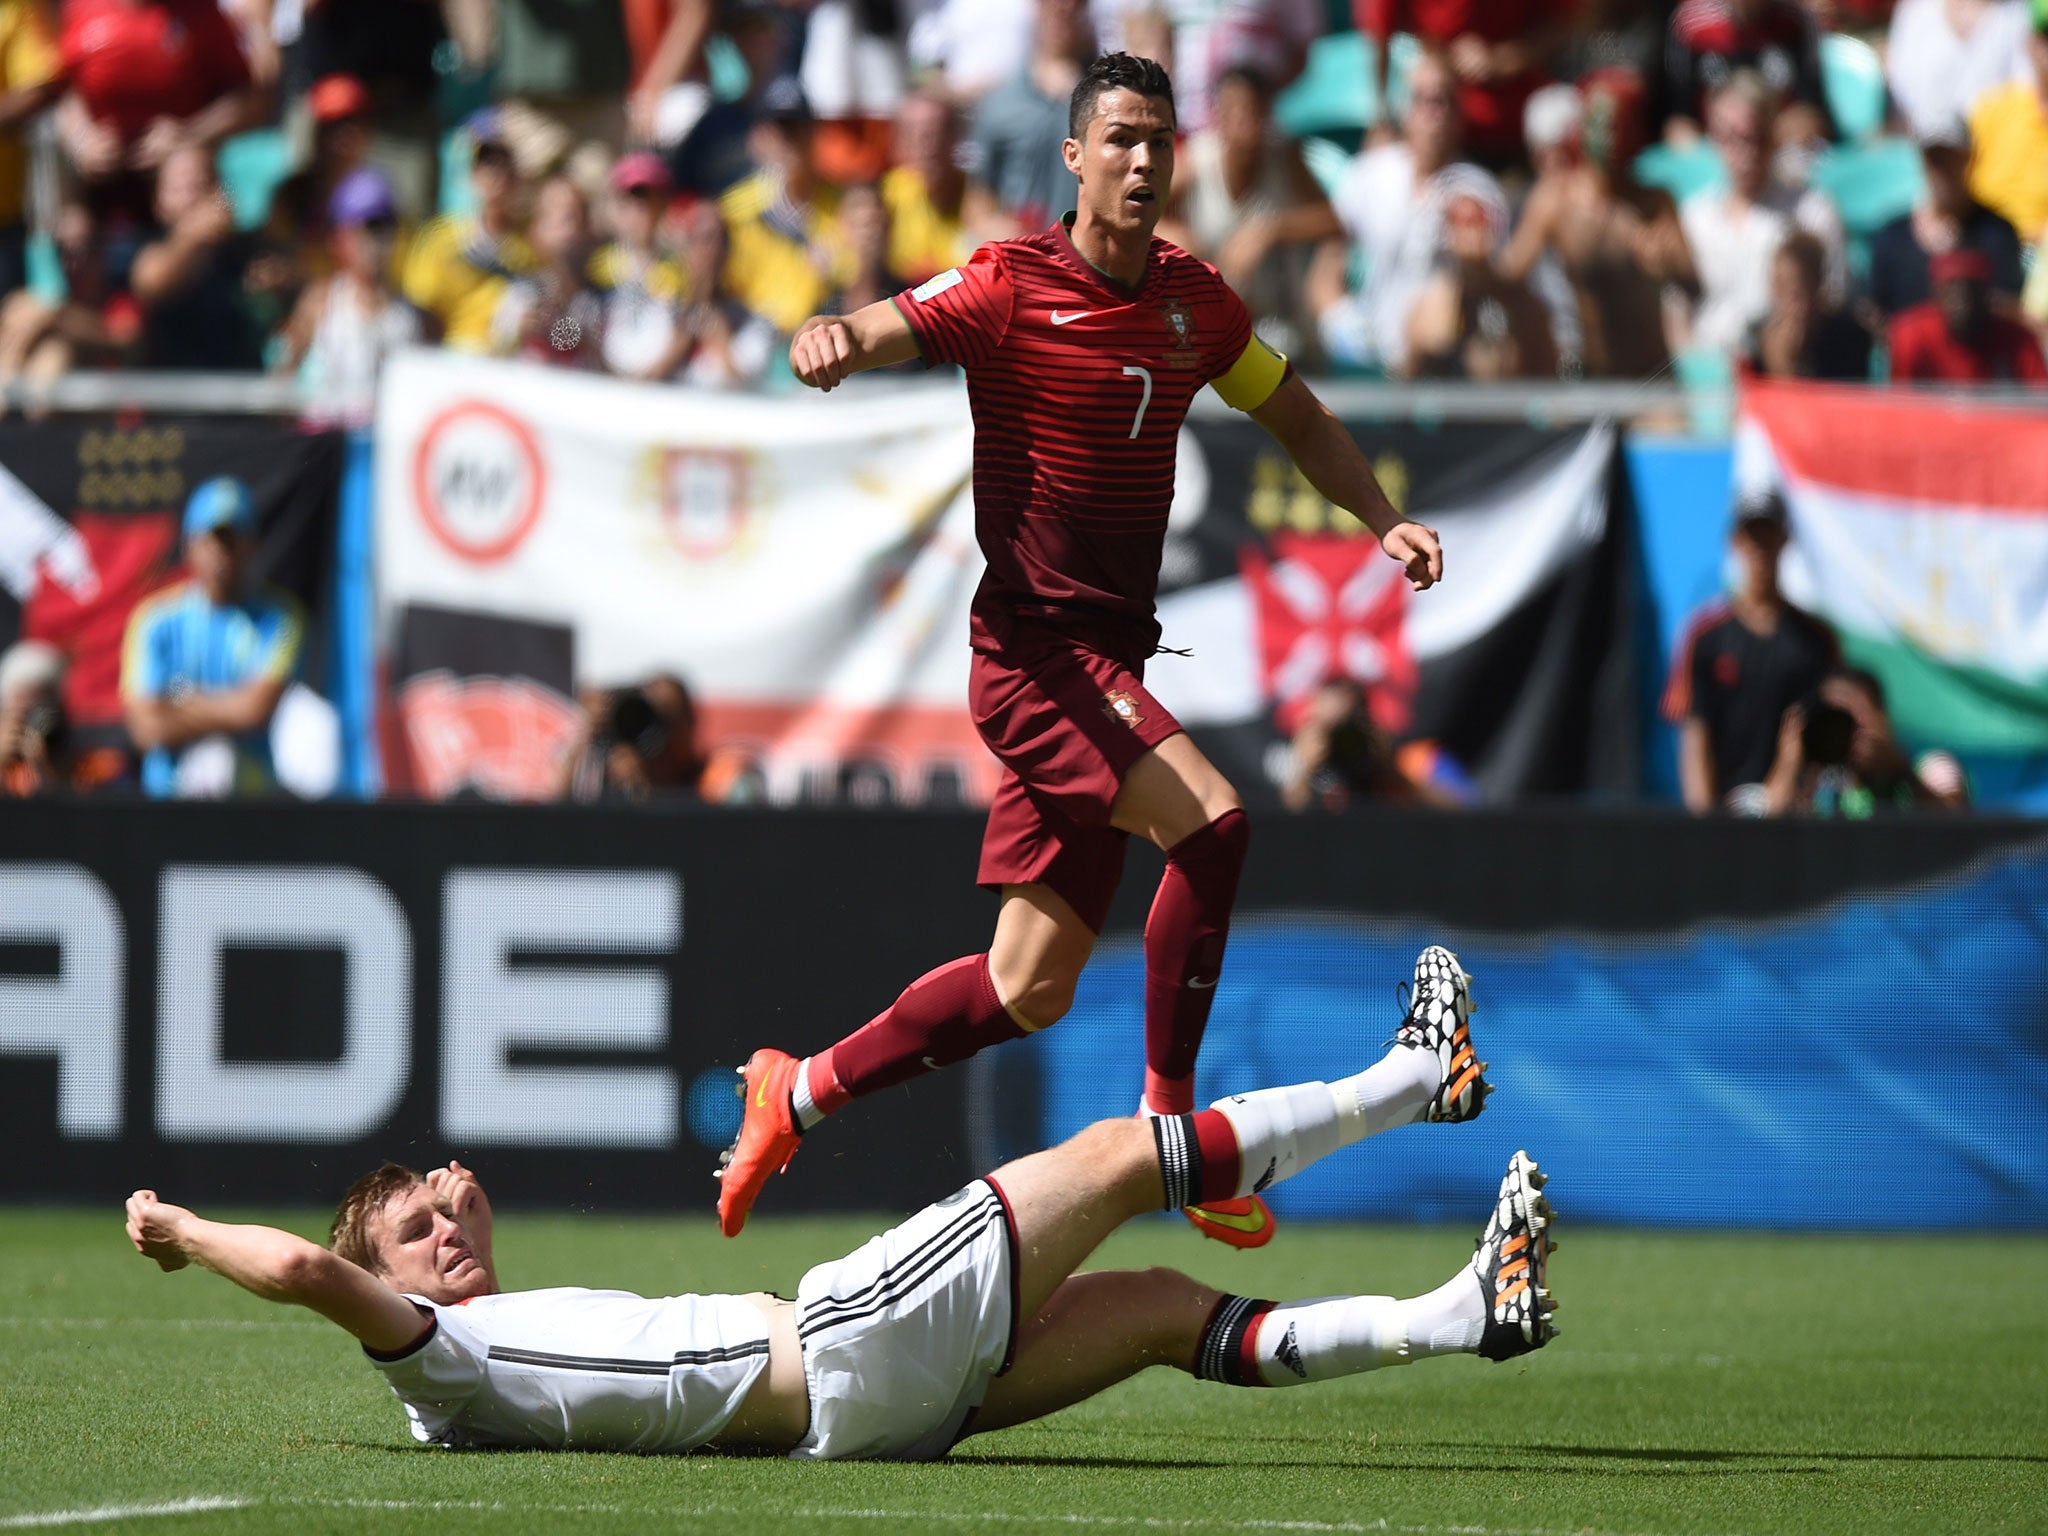 Cristiano Ronaldo skips Thomas Muller's challenge in the World Cup match between Germany and Portugal